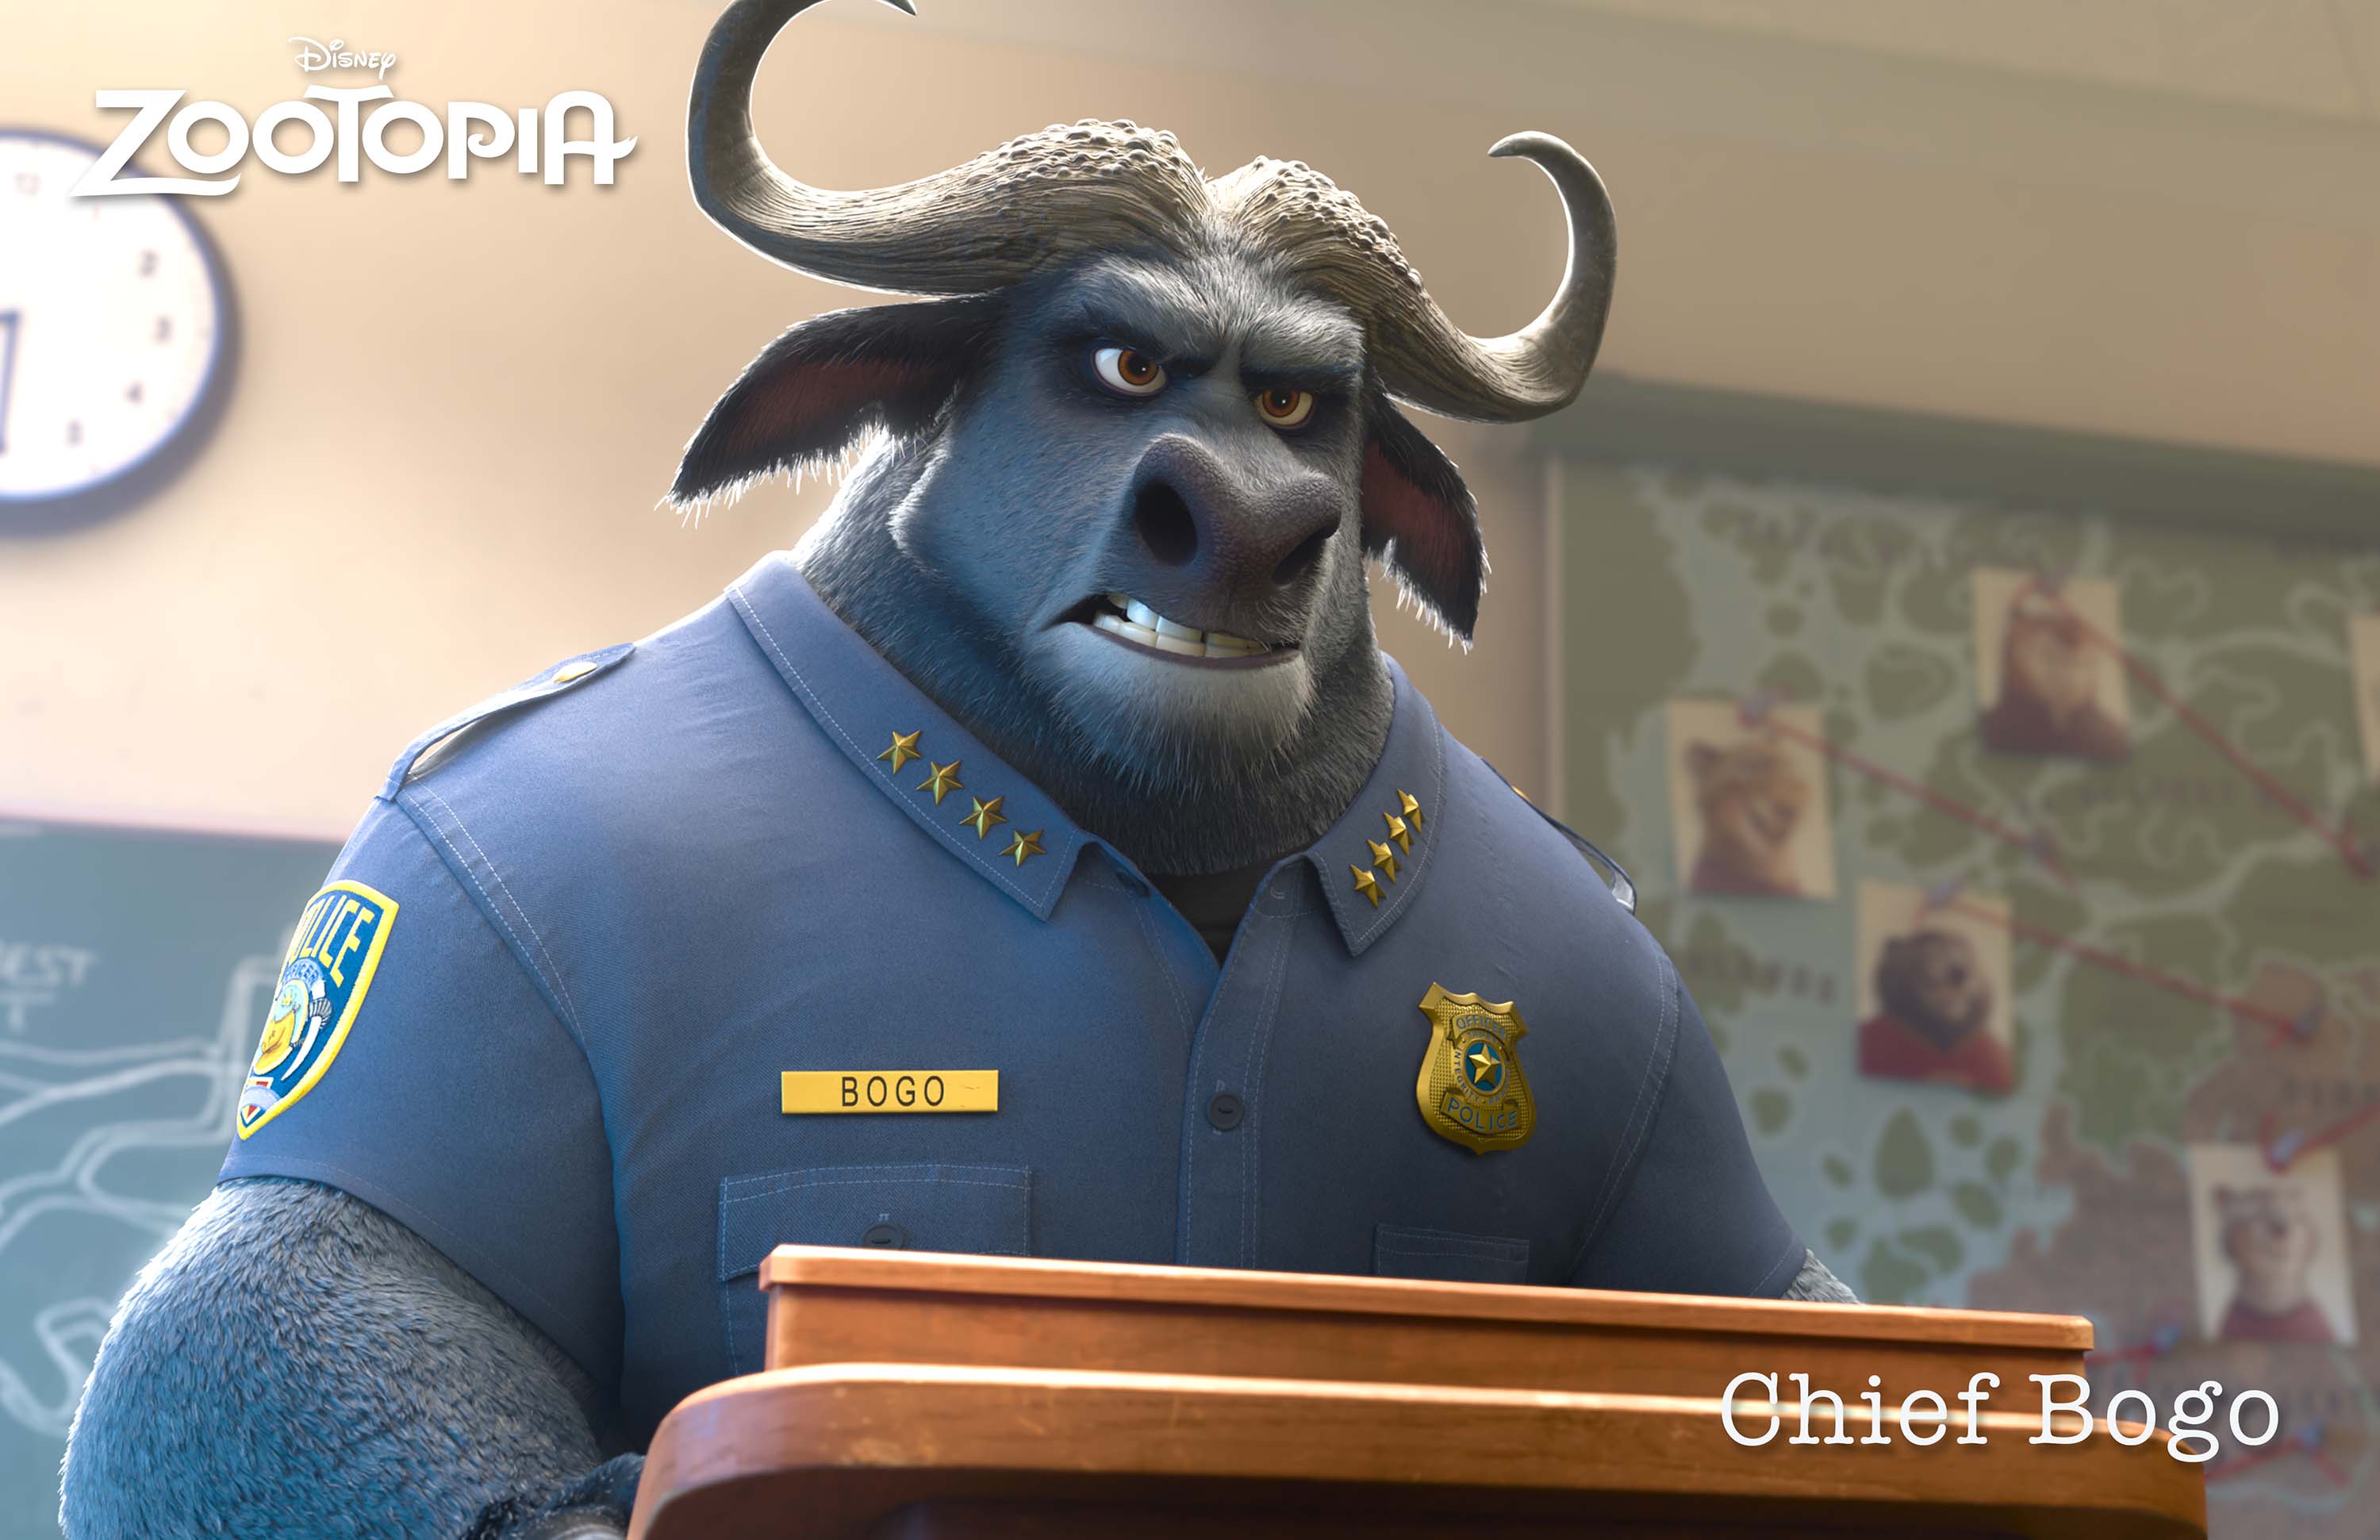 ZOOTOPIA â€“ CHIEF BOGO, head of the Zootopia Police Department. A tough cape buffalo with 2,000 lbs of attitude, Bogo is reluctant to add Judy Hopps, Zootopia’s first bunny cop, to his squad of hardened rhinos, elephants and hippos. Â©2015 Disney. All Rights Reserved.